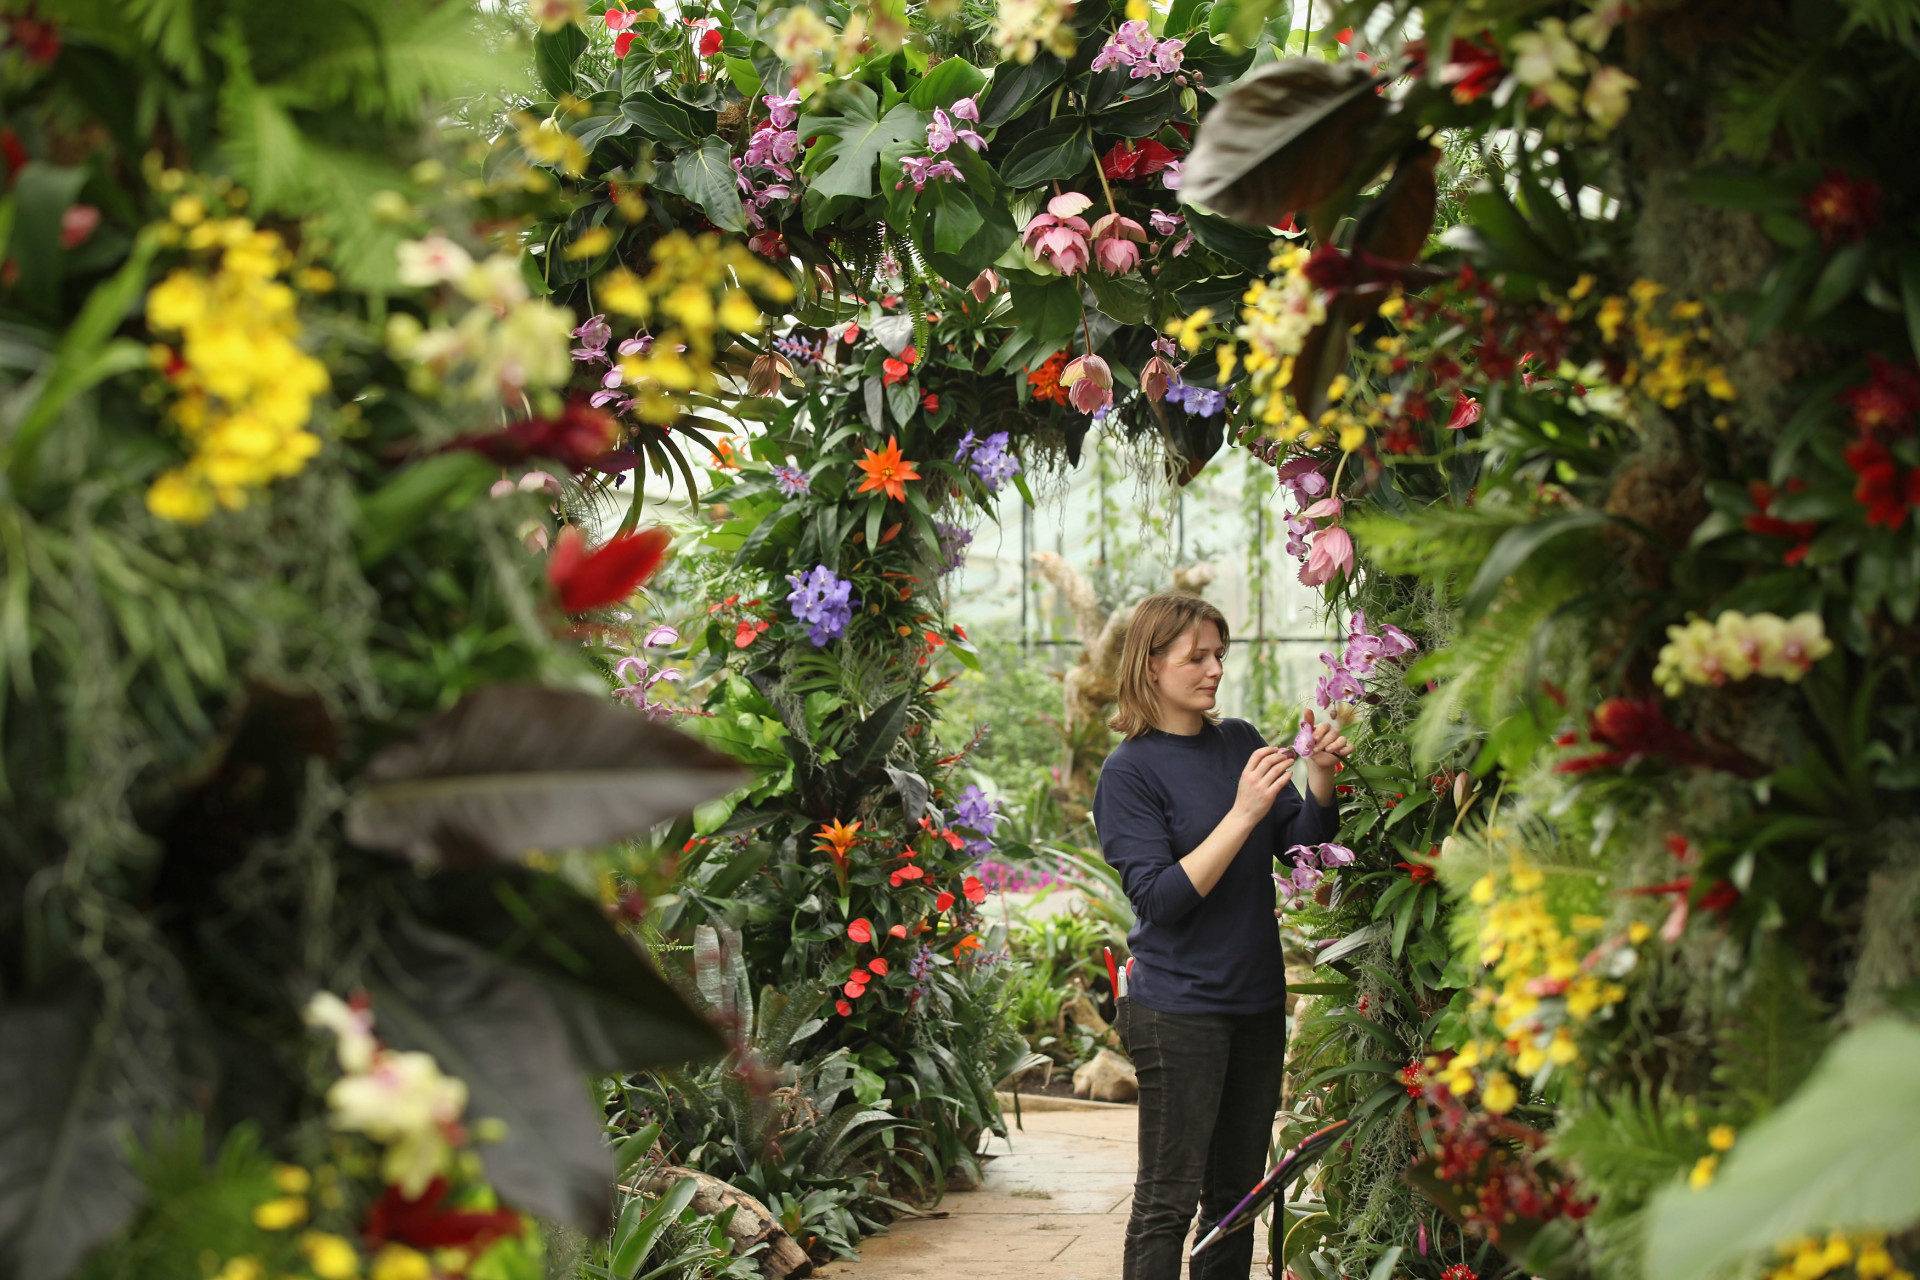 Kew Gardens is host to a large display of exotic Spring flowers from all corners of the world.